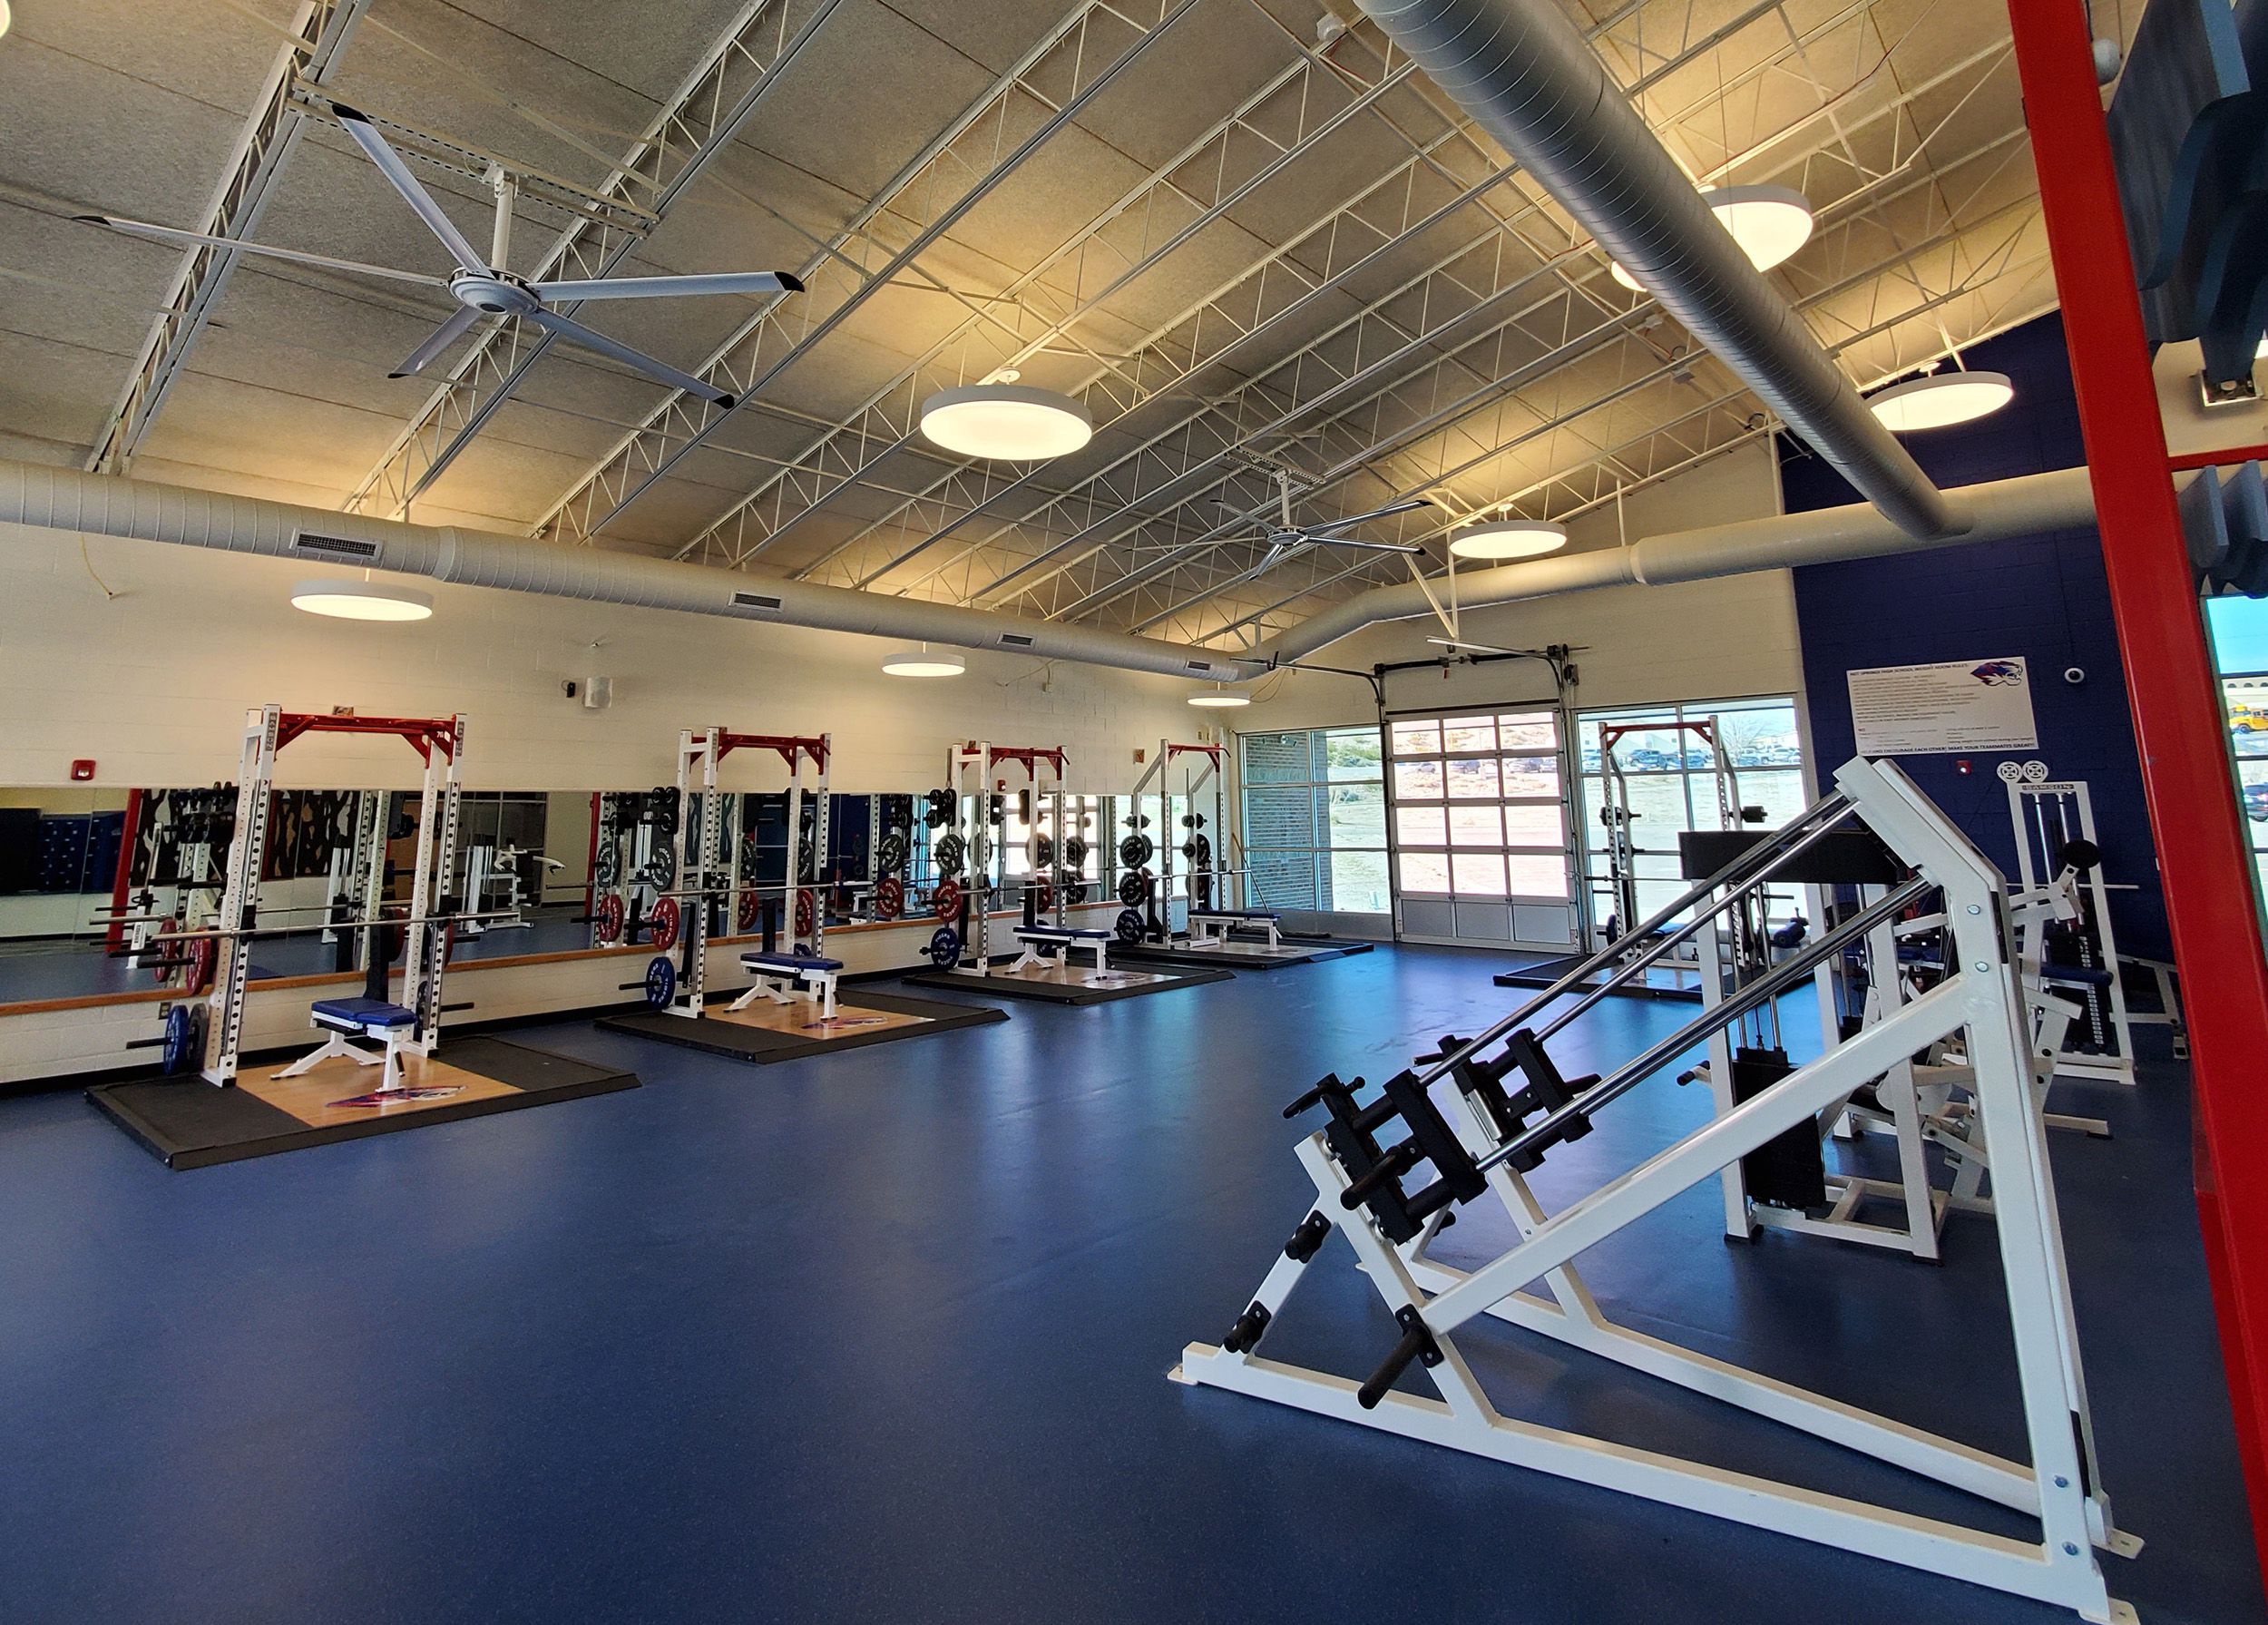 Wilson & Company reduced costs on the project while creating a unique space to promote physical fitness.